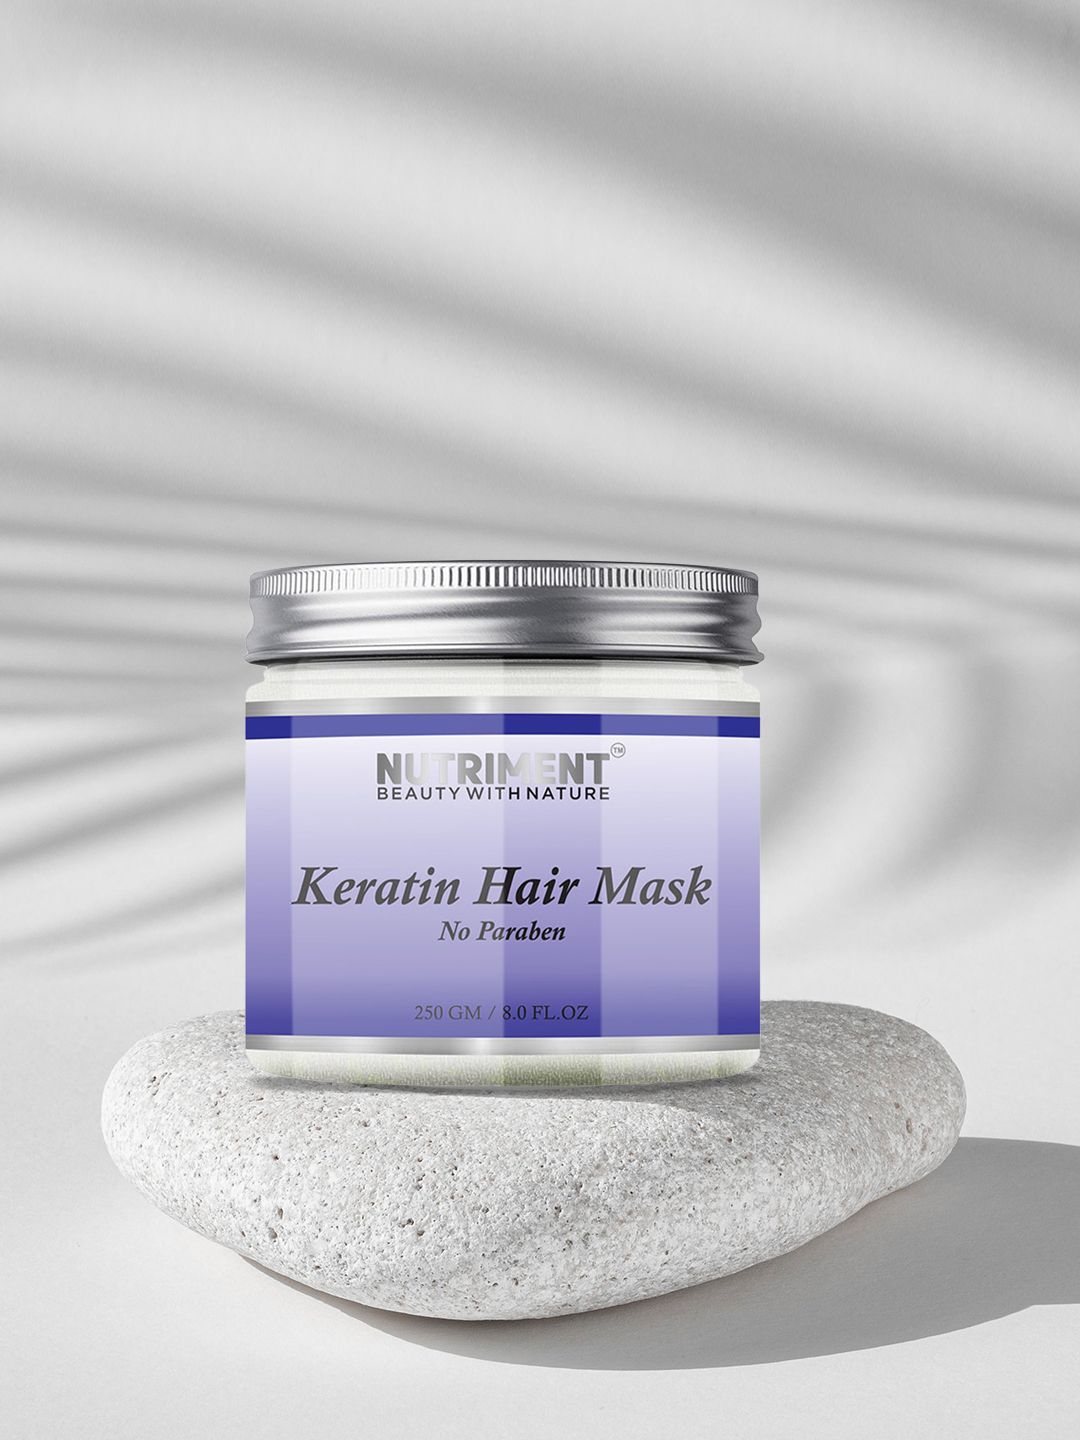 Nutriment Kertain Hair Mask 250 gm Price in India